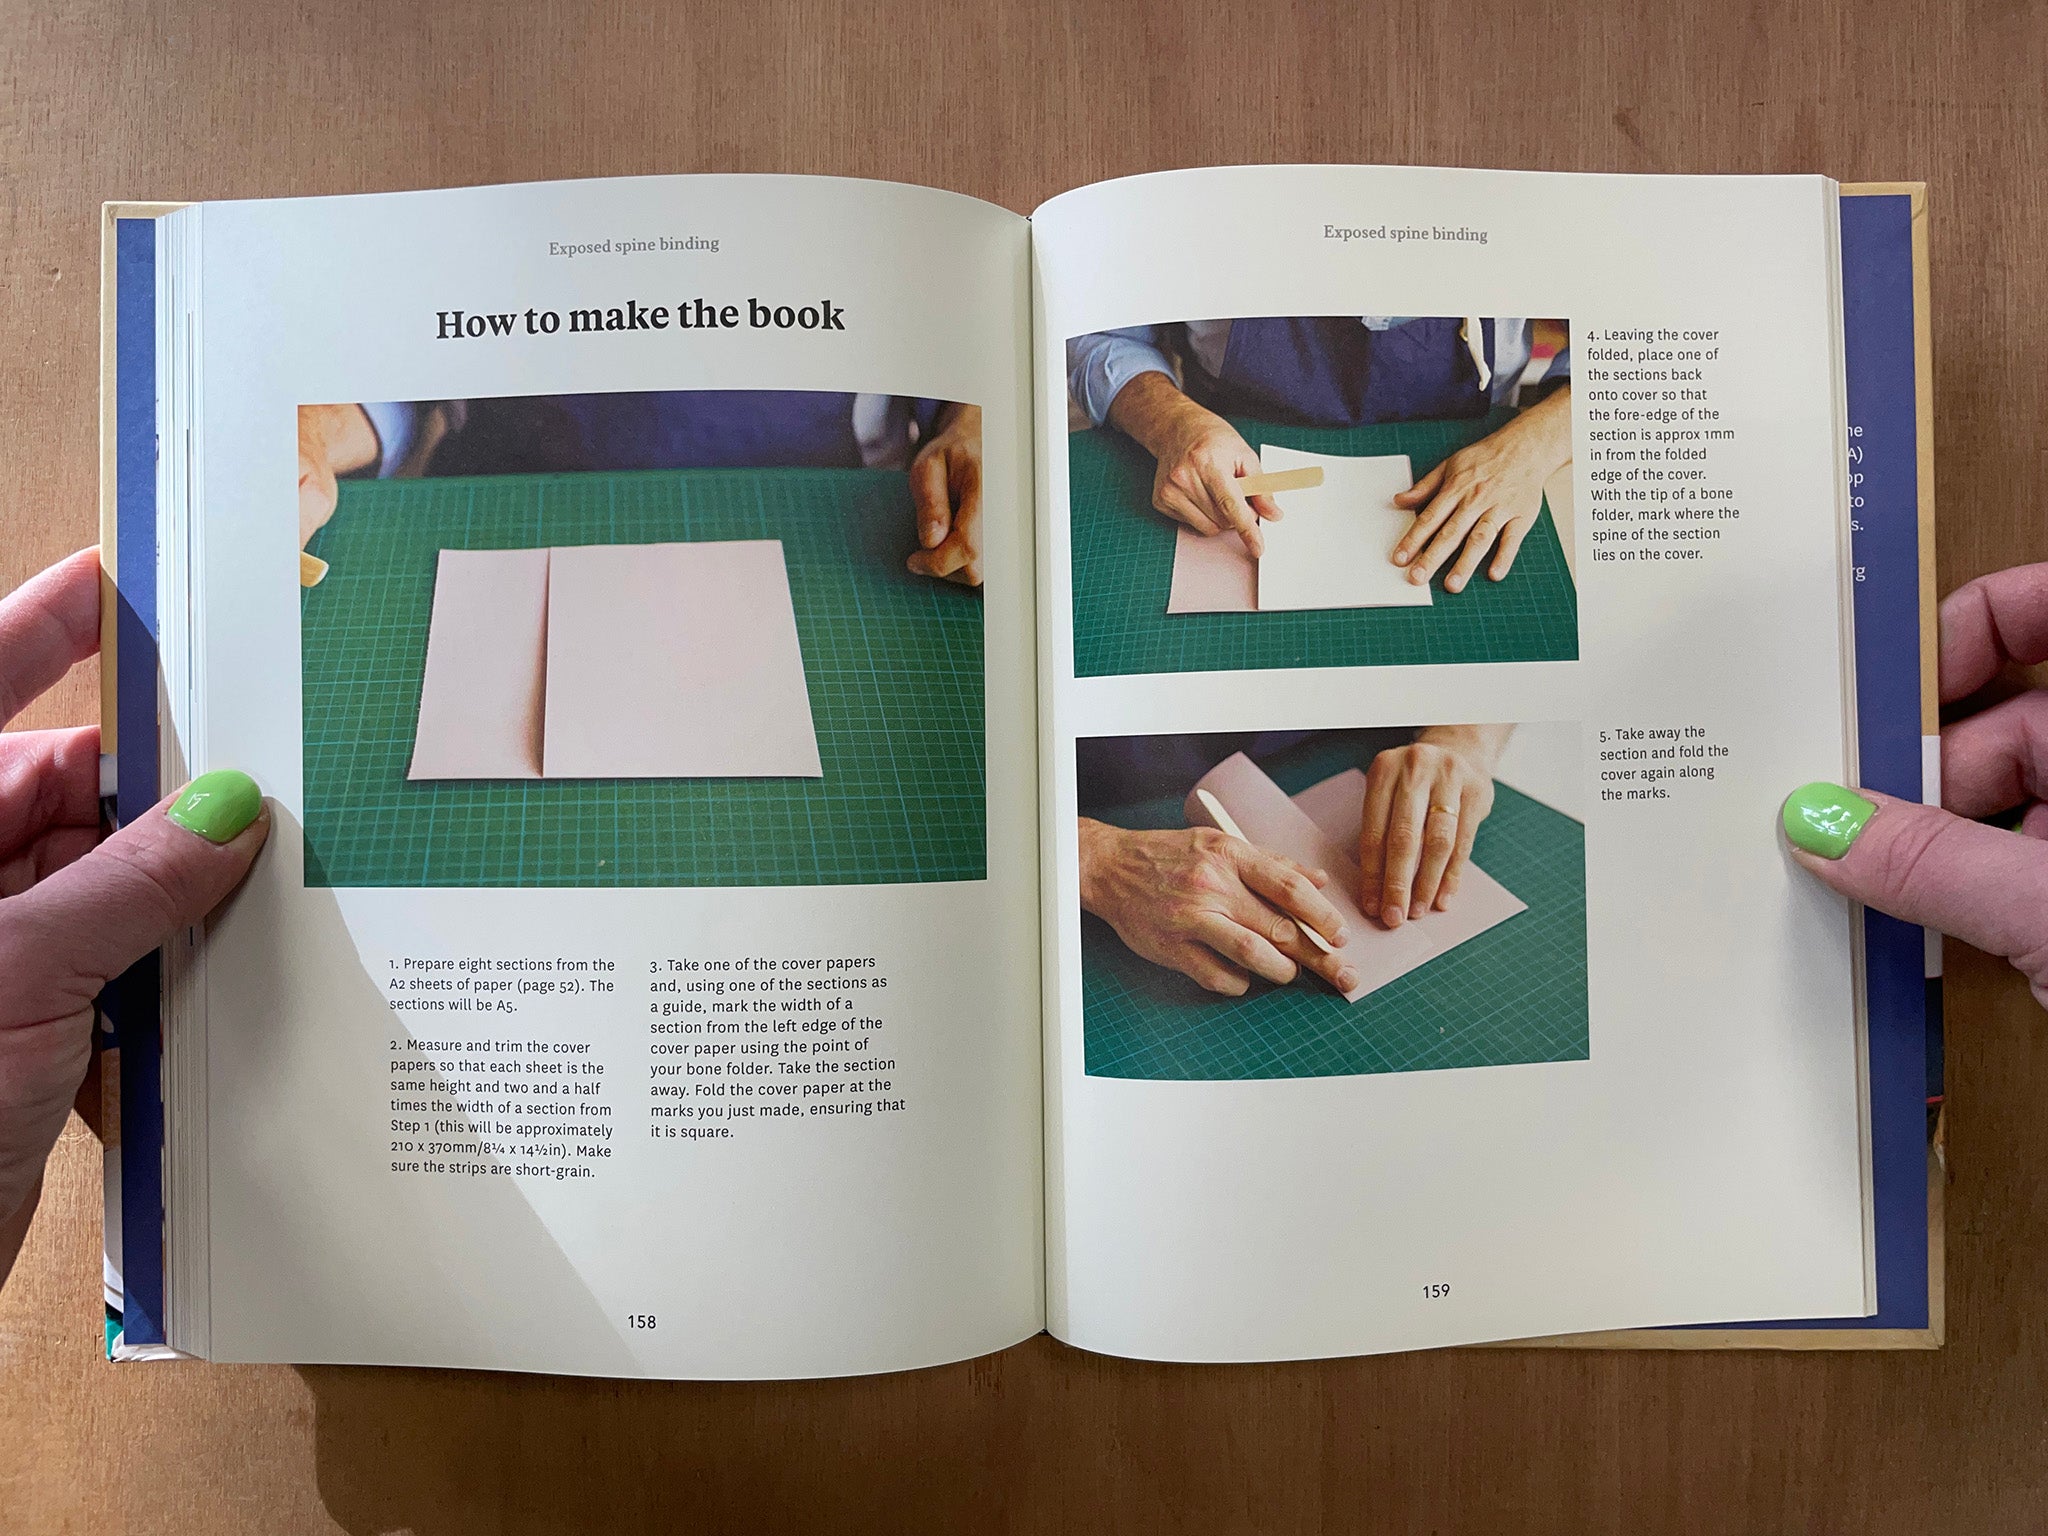 MAKING BOOKS: A GUIDE TO CREATING HAND-CRAFTED BOOKS BY THE LONDON CENTRE FOR BOOK ARTS by Simon Goode & Ira Yonemura